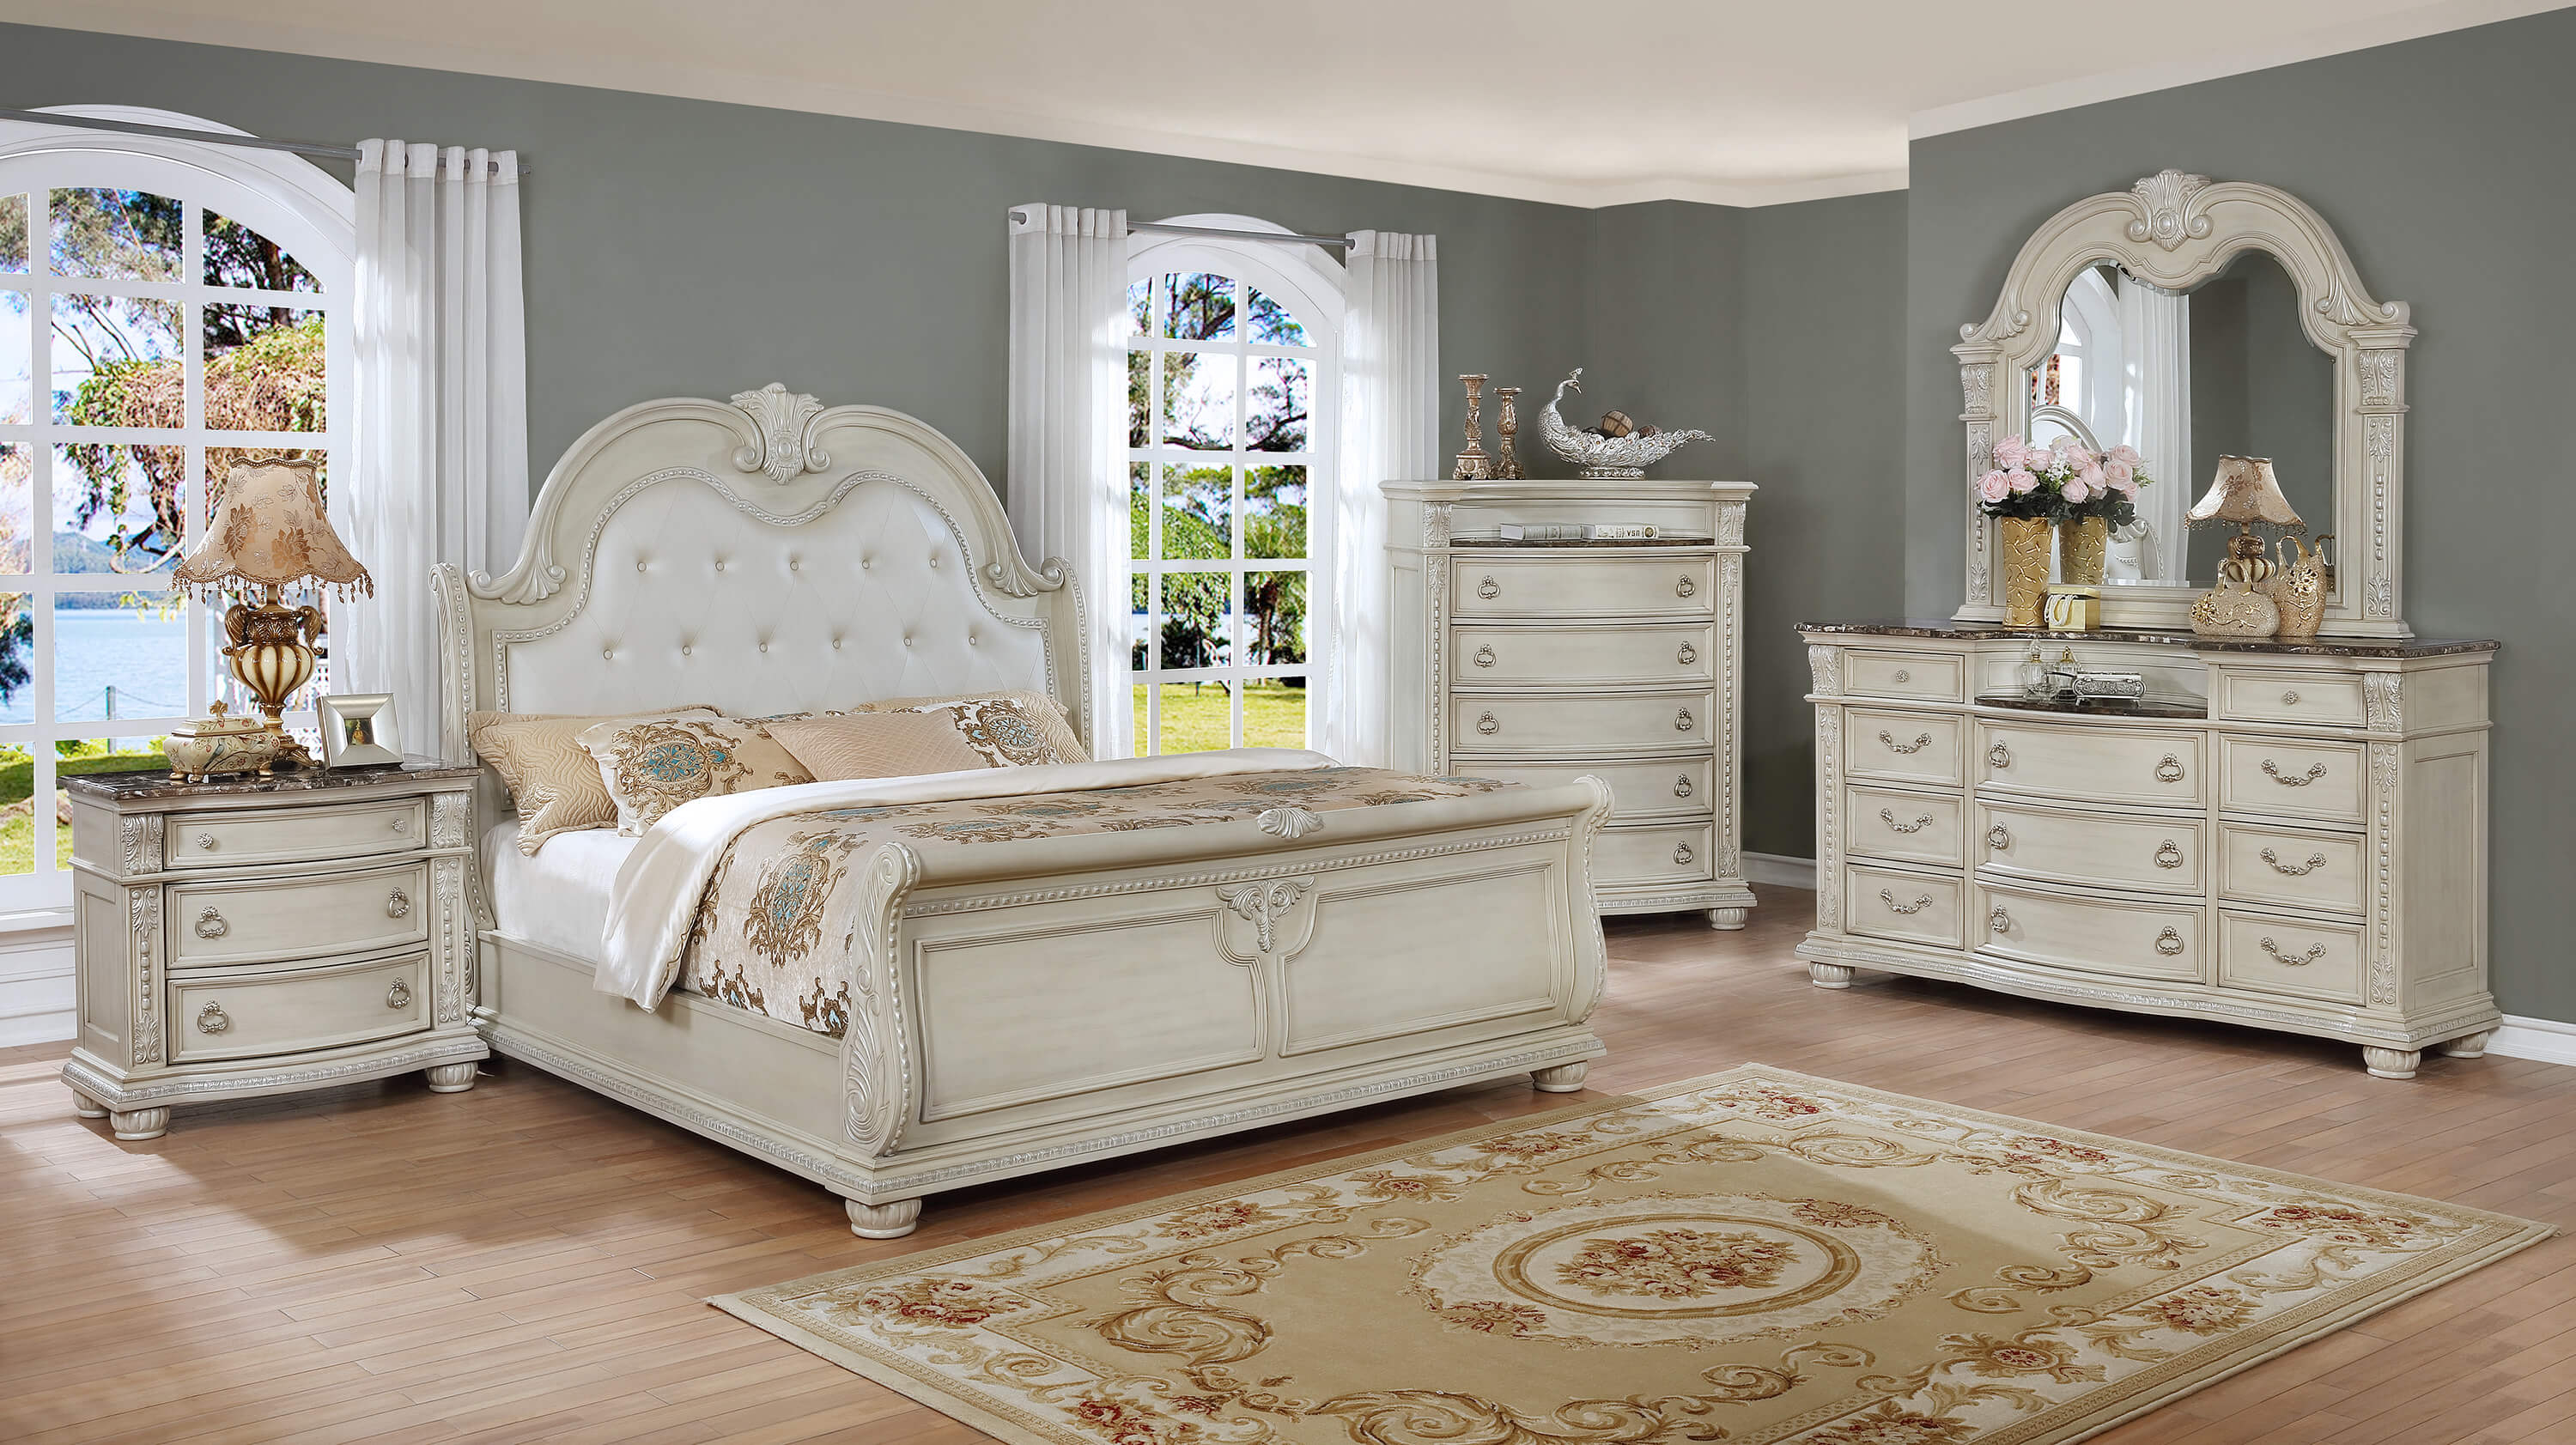 B1630 Stanley Antique White Marble Bedroom Set Crown Mark in size 3000 X 1683